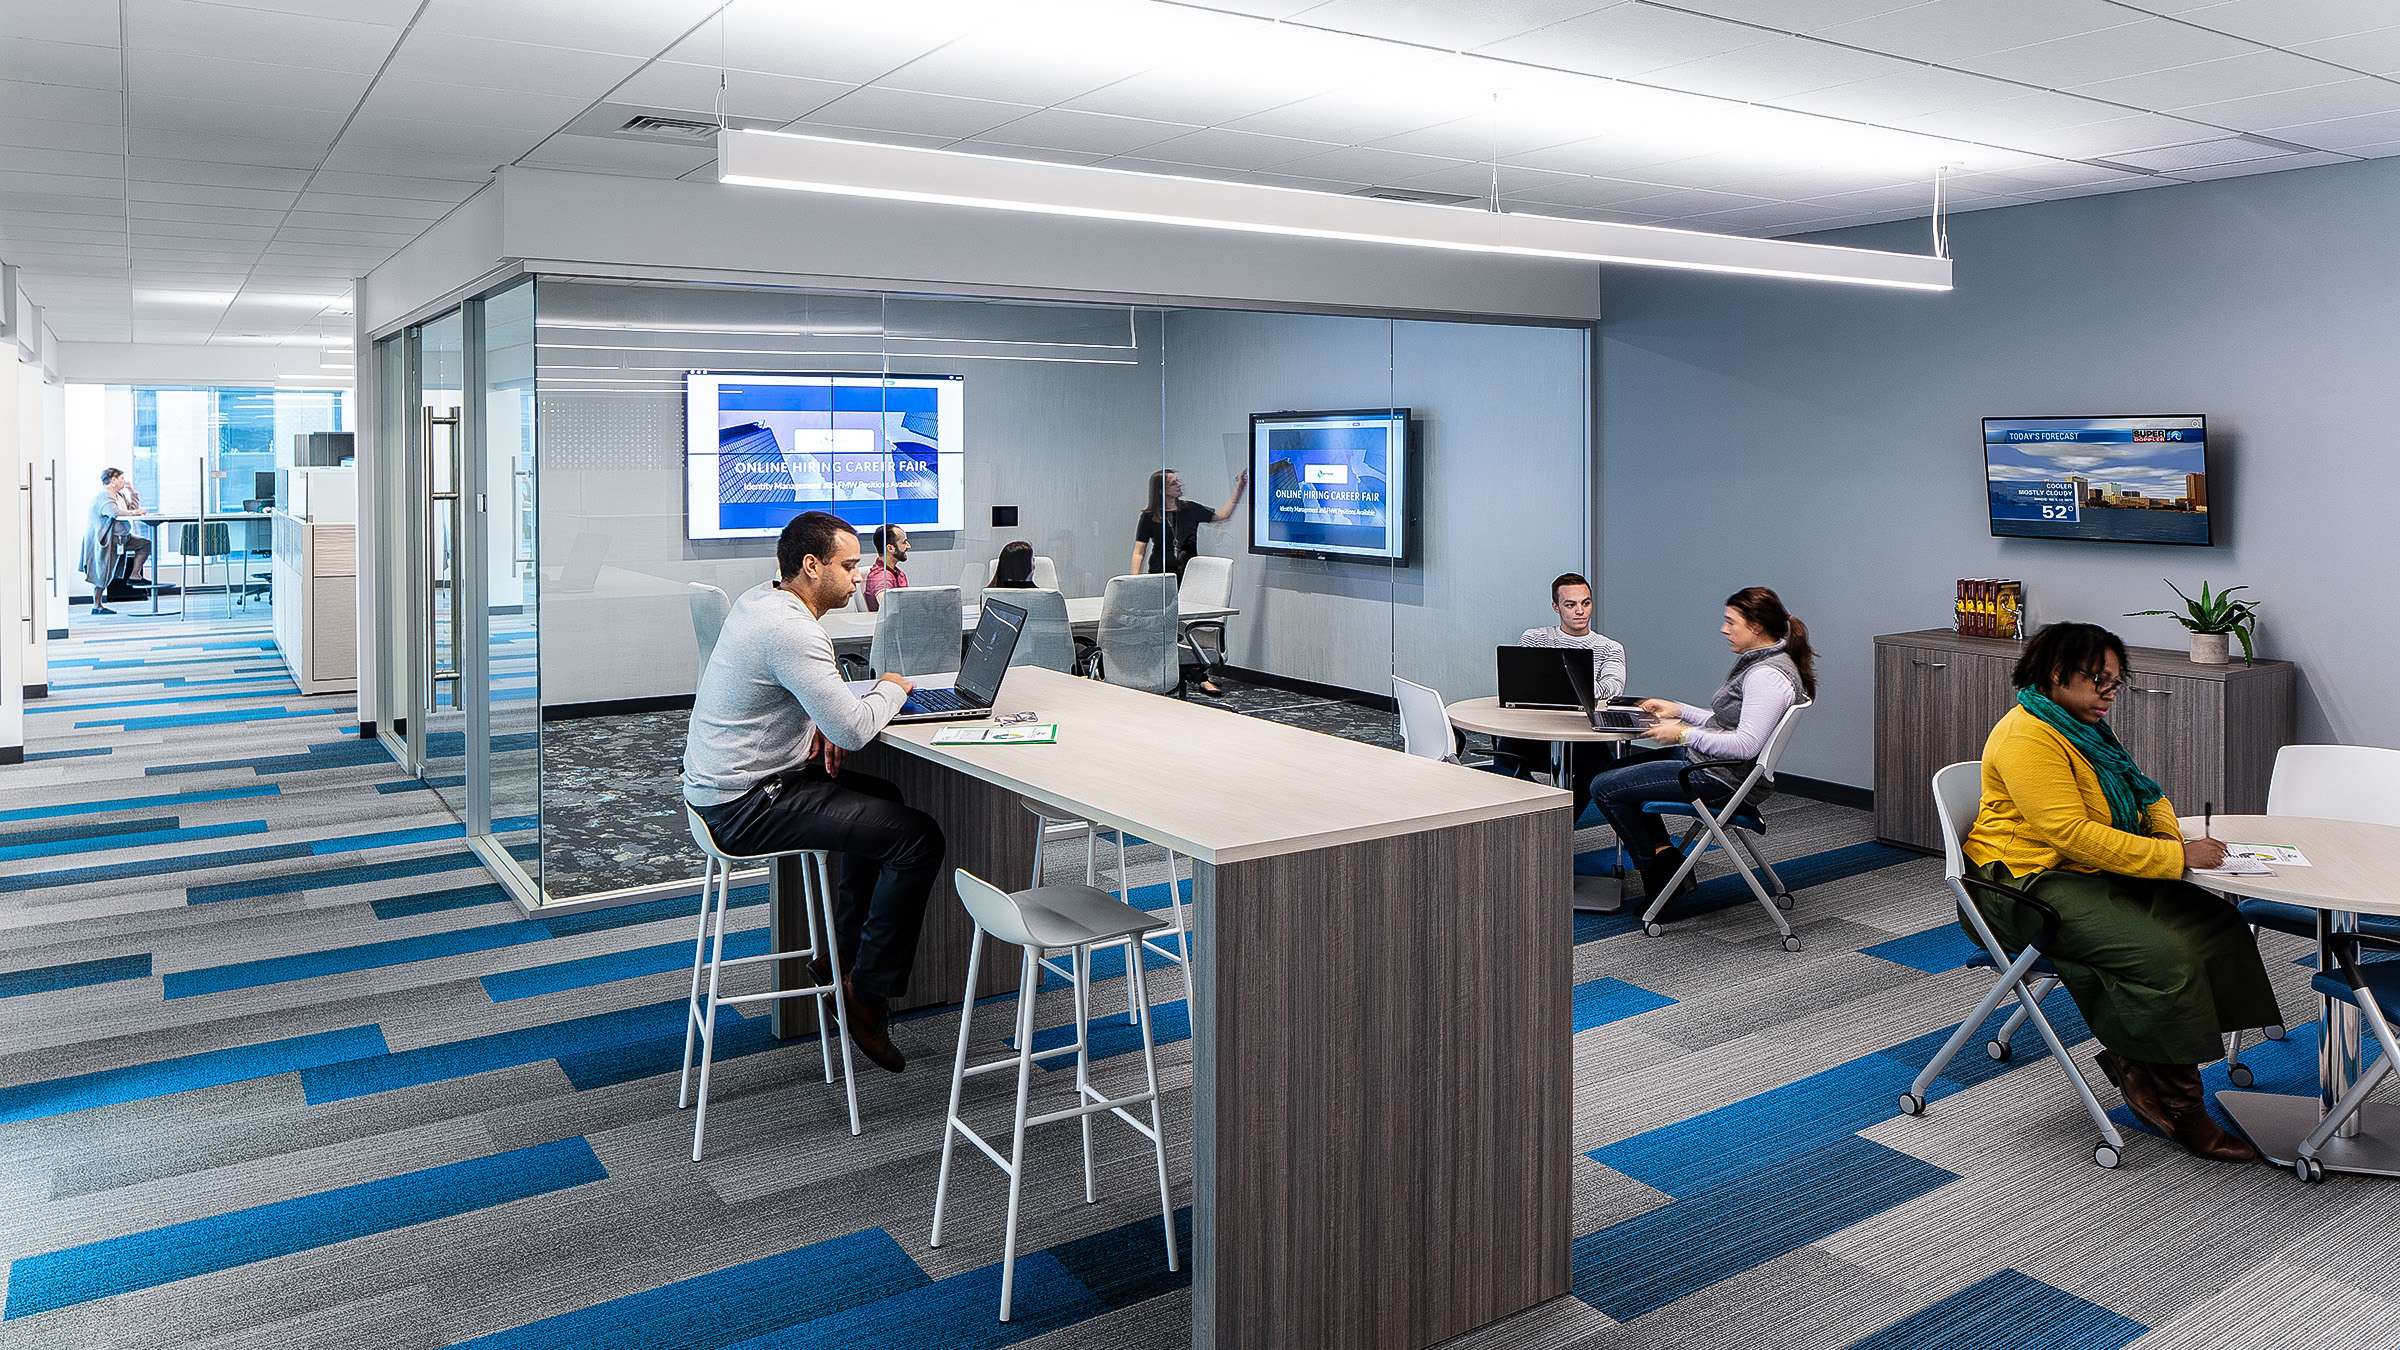 At Mythics, Inc. an innovation lab and adjacent collaboration zone is a physical embodiment of their cultural emphasis on great, outside-the-box thinking.